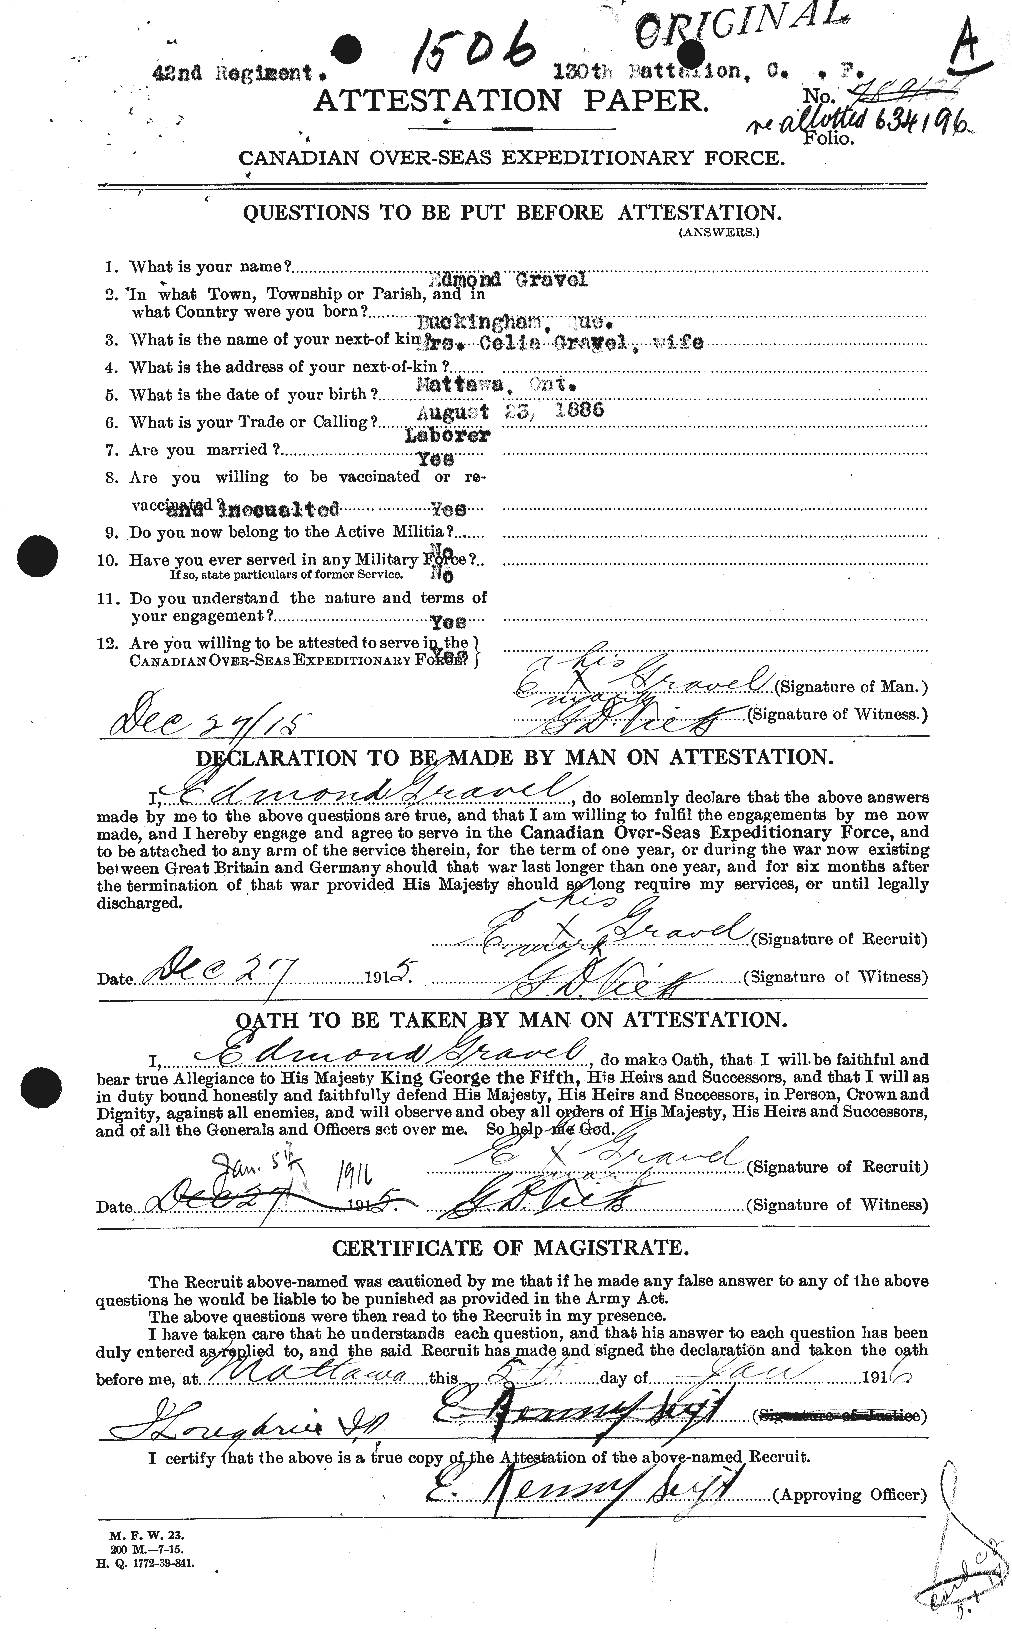 Personnel Records of the First World War - CEF 364613a